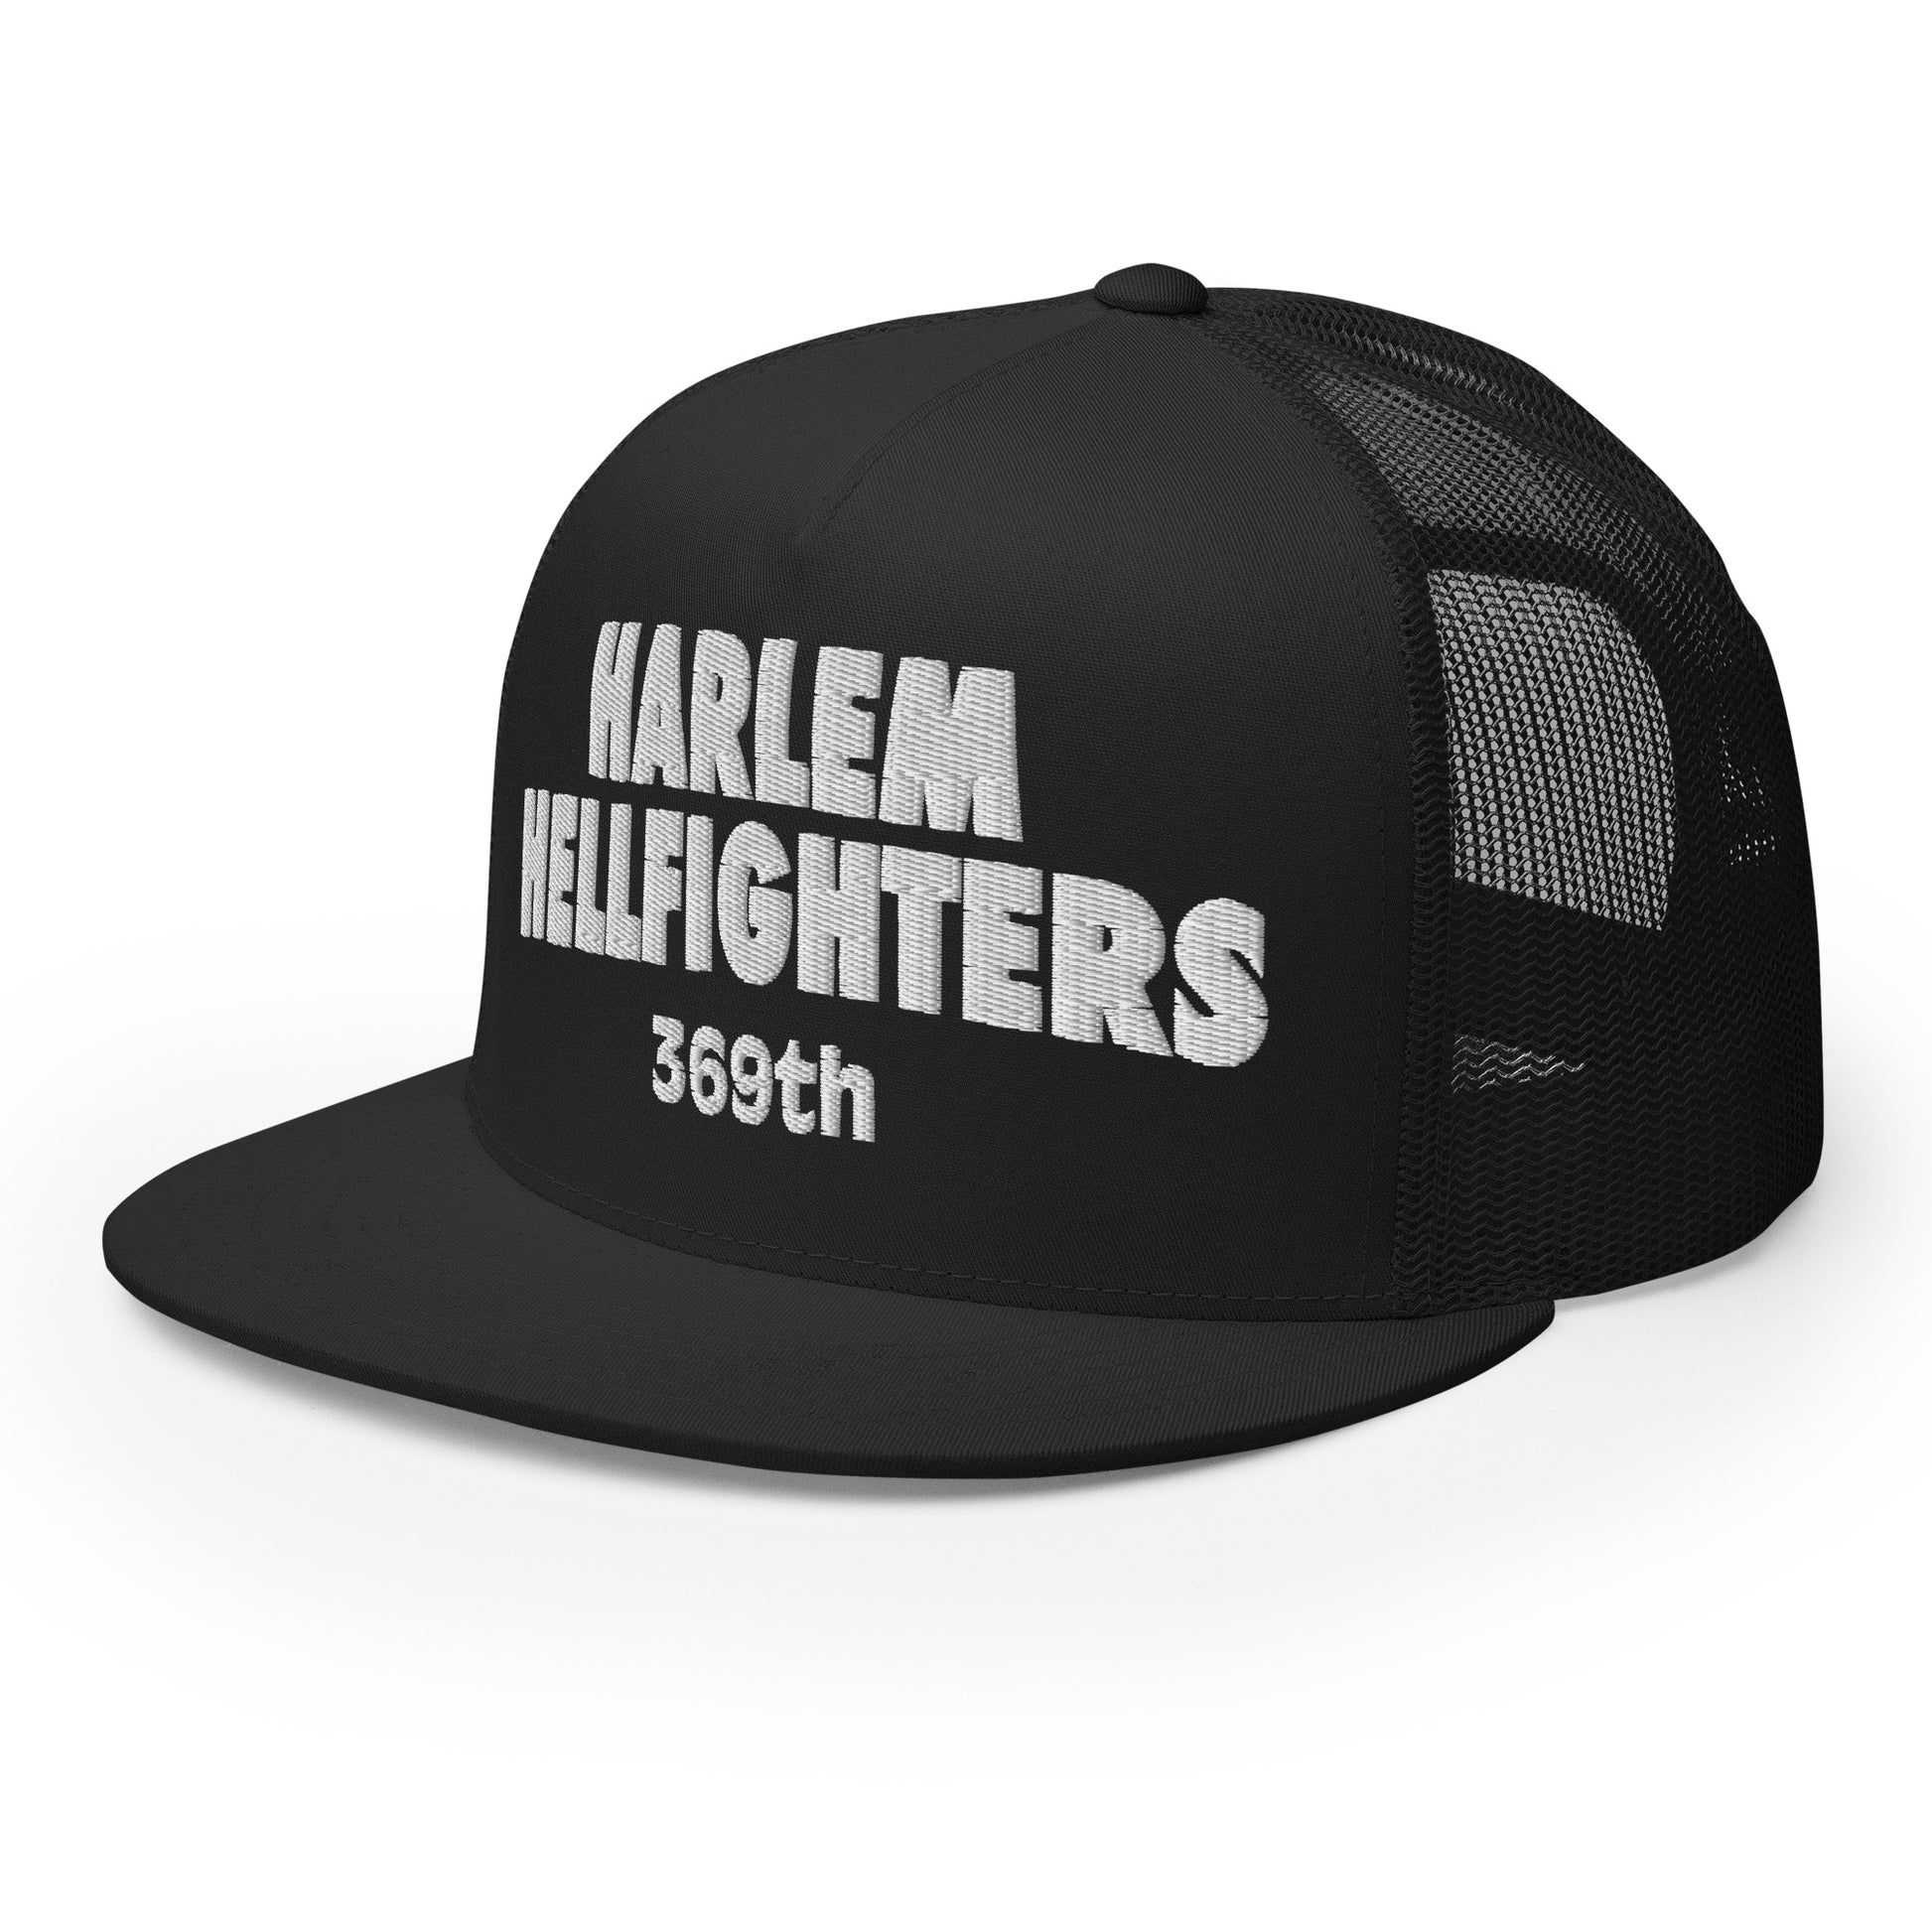 black trucker hat with harlem hellfighters 369th embroidery